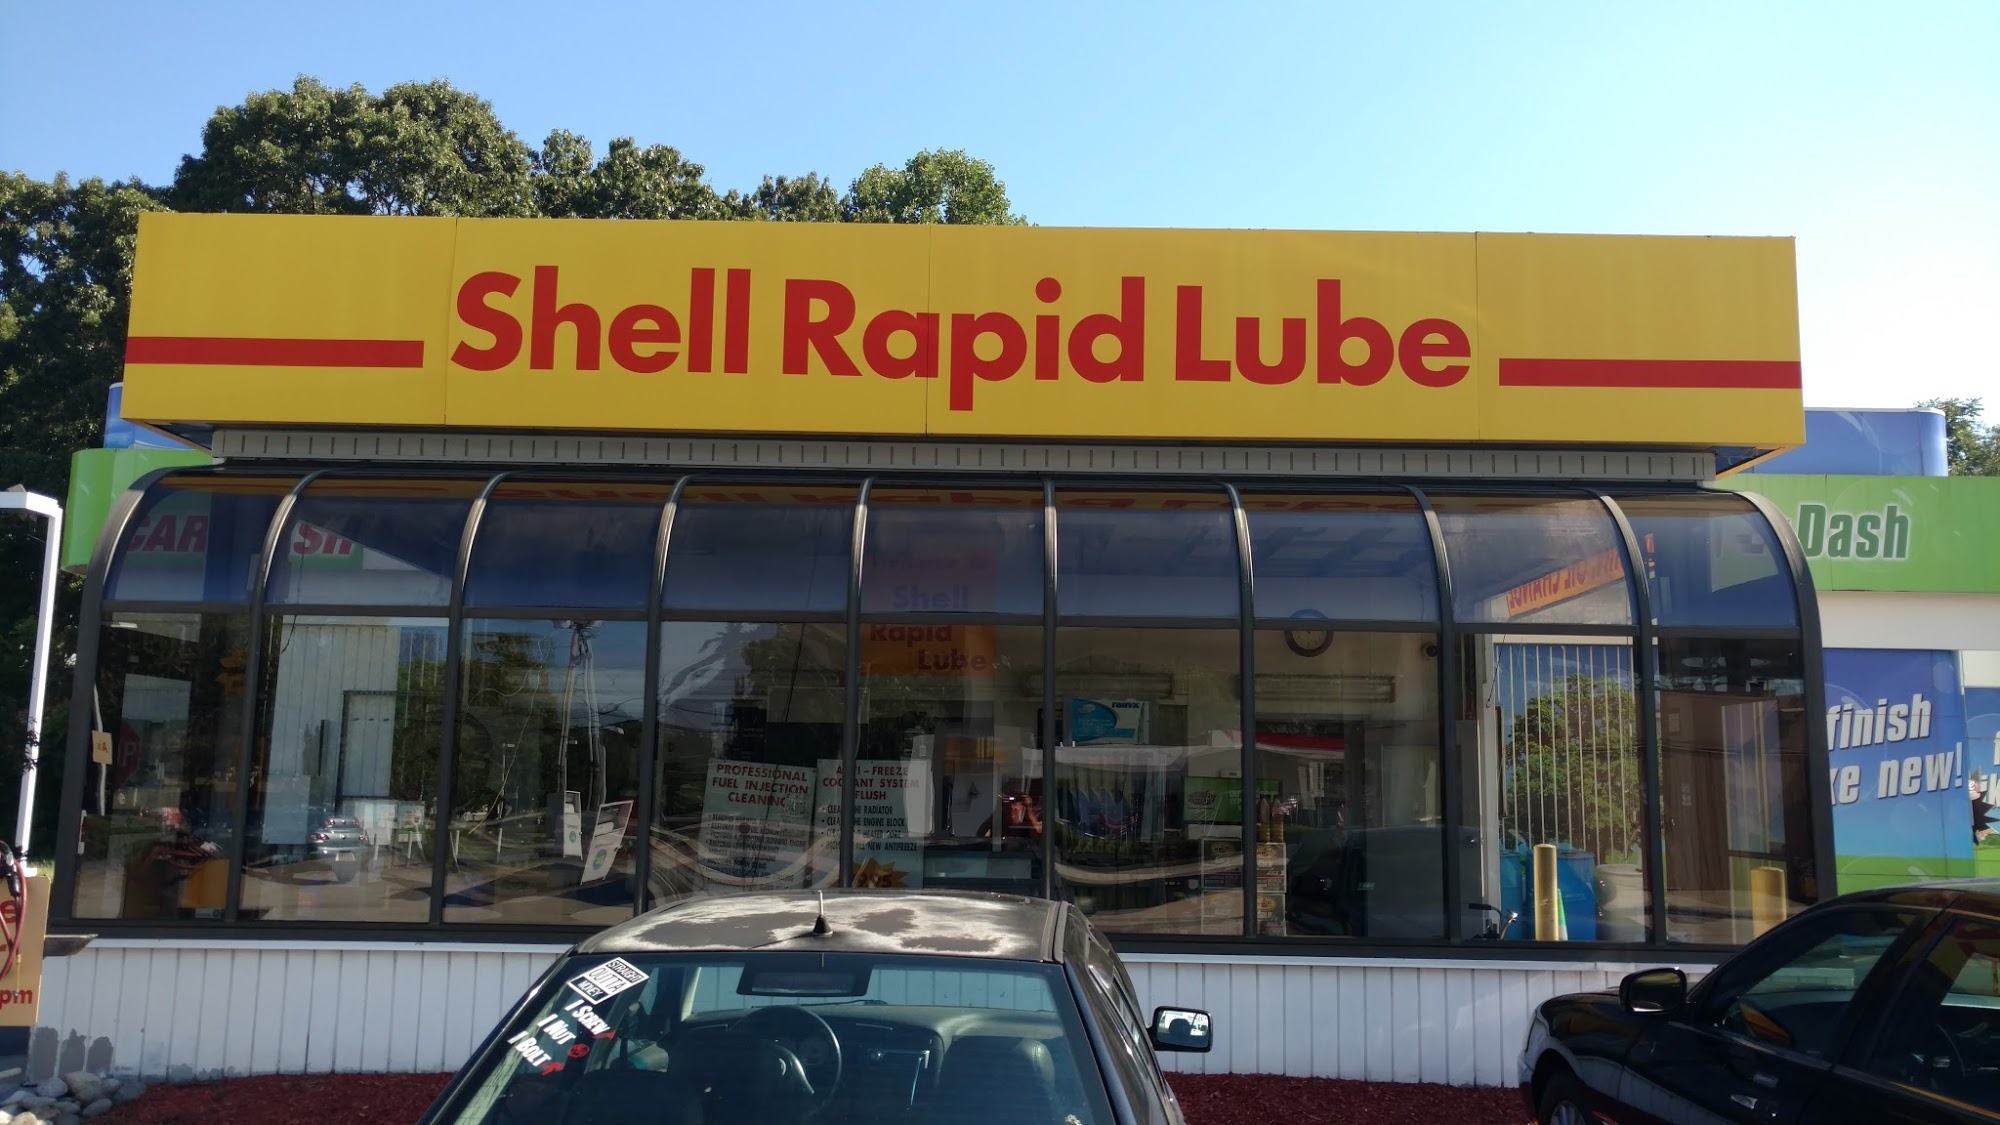 Norm's Rapid Lube (White Horse Rapid Lube)